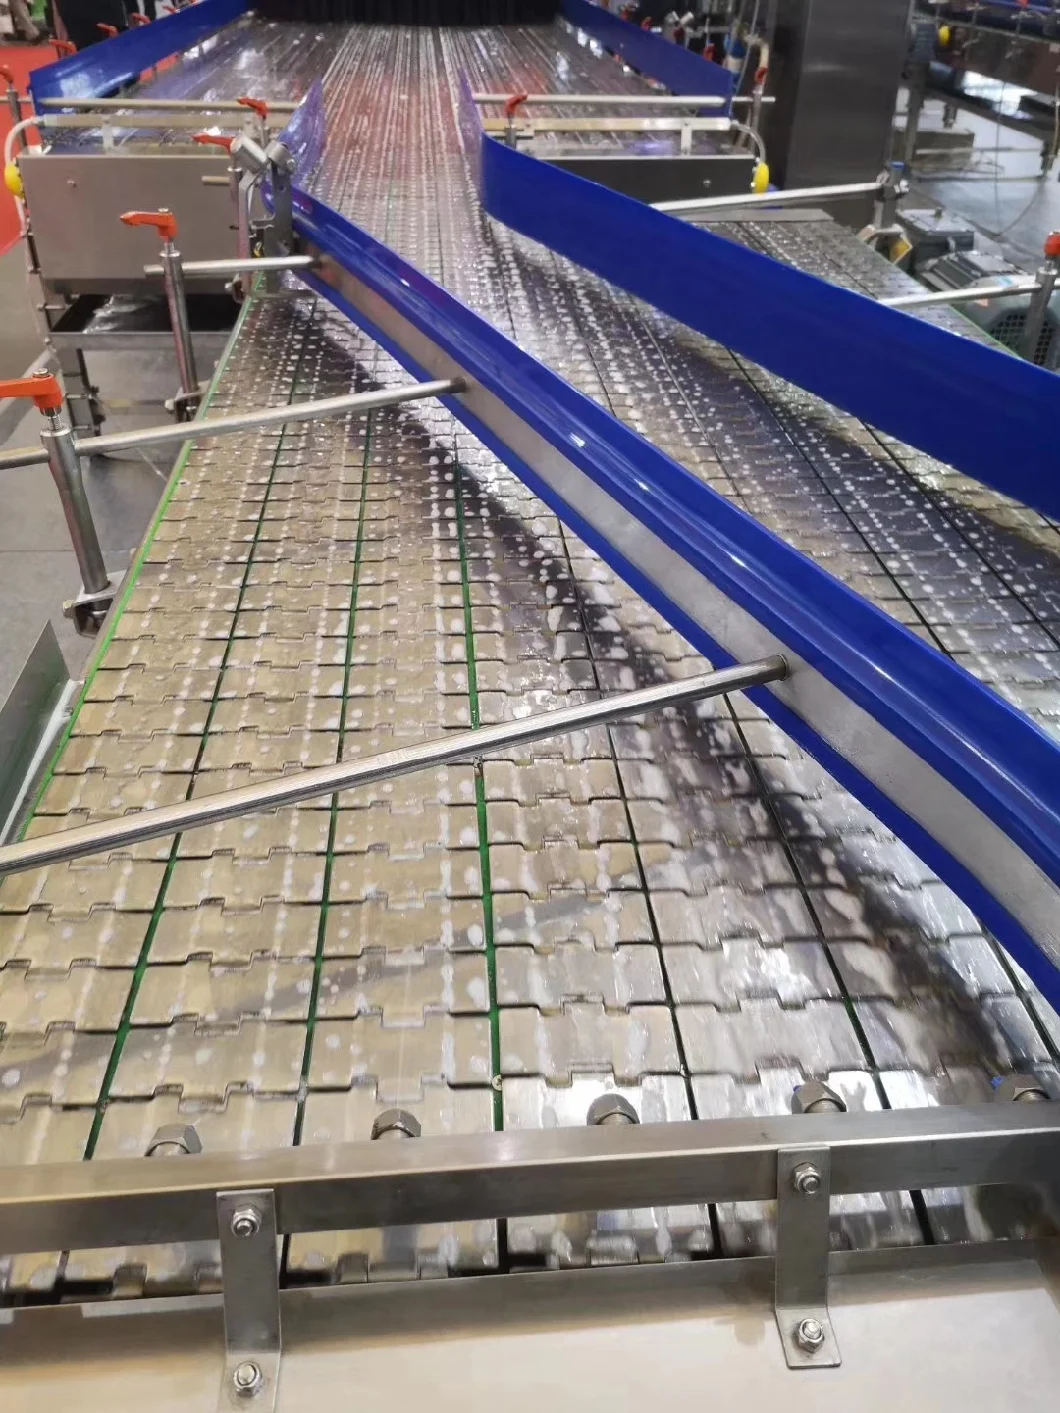 Stainless Steel Plain Chain Conveyor for Food Industry Filling Machine Juice Produce Line Conveyor